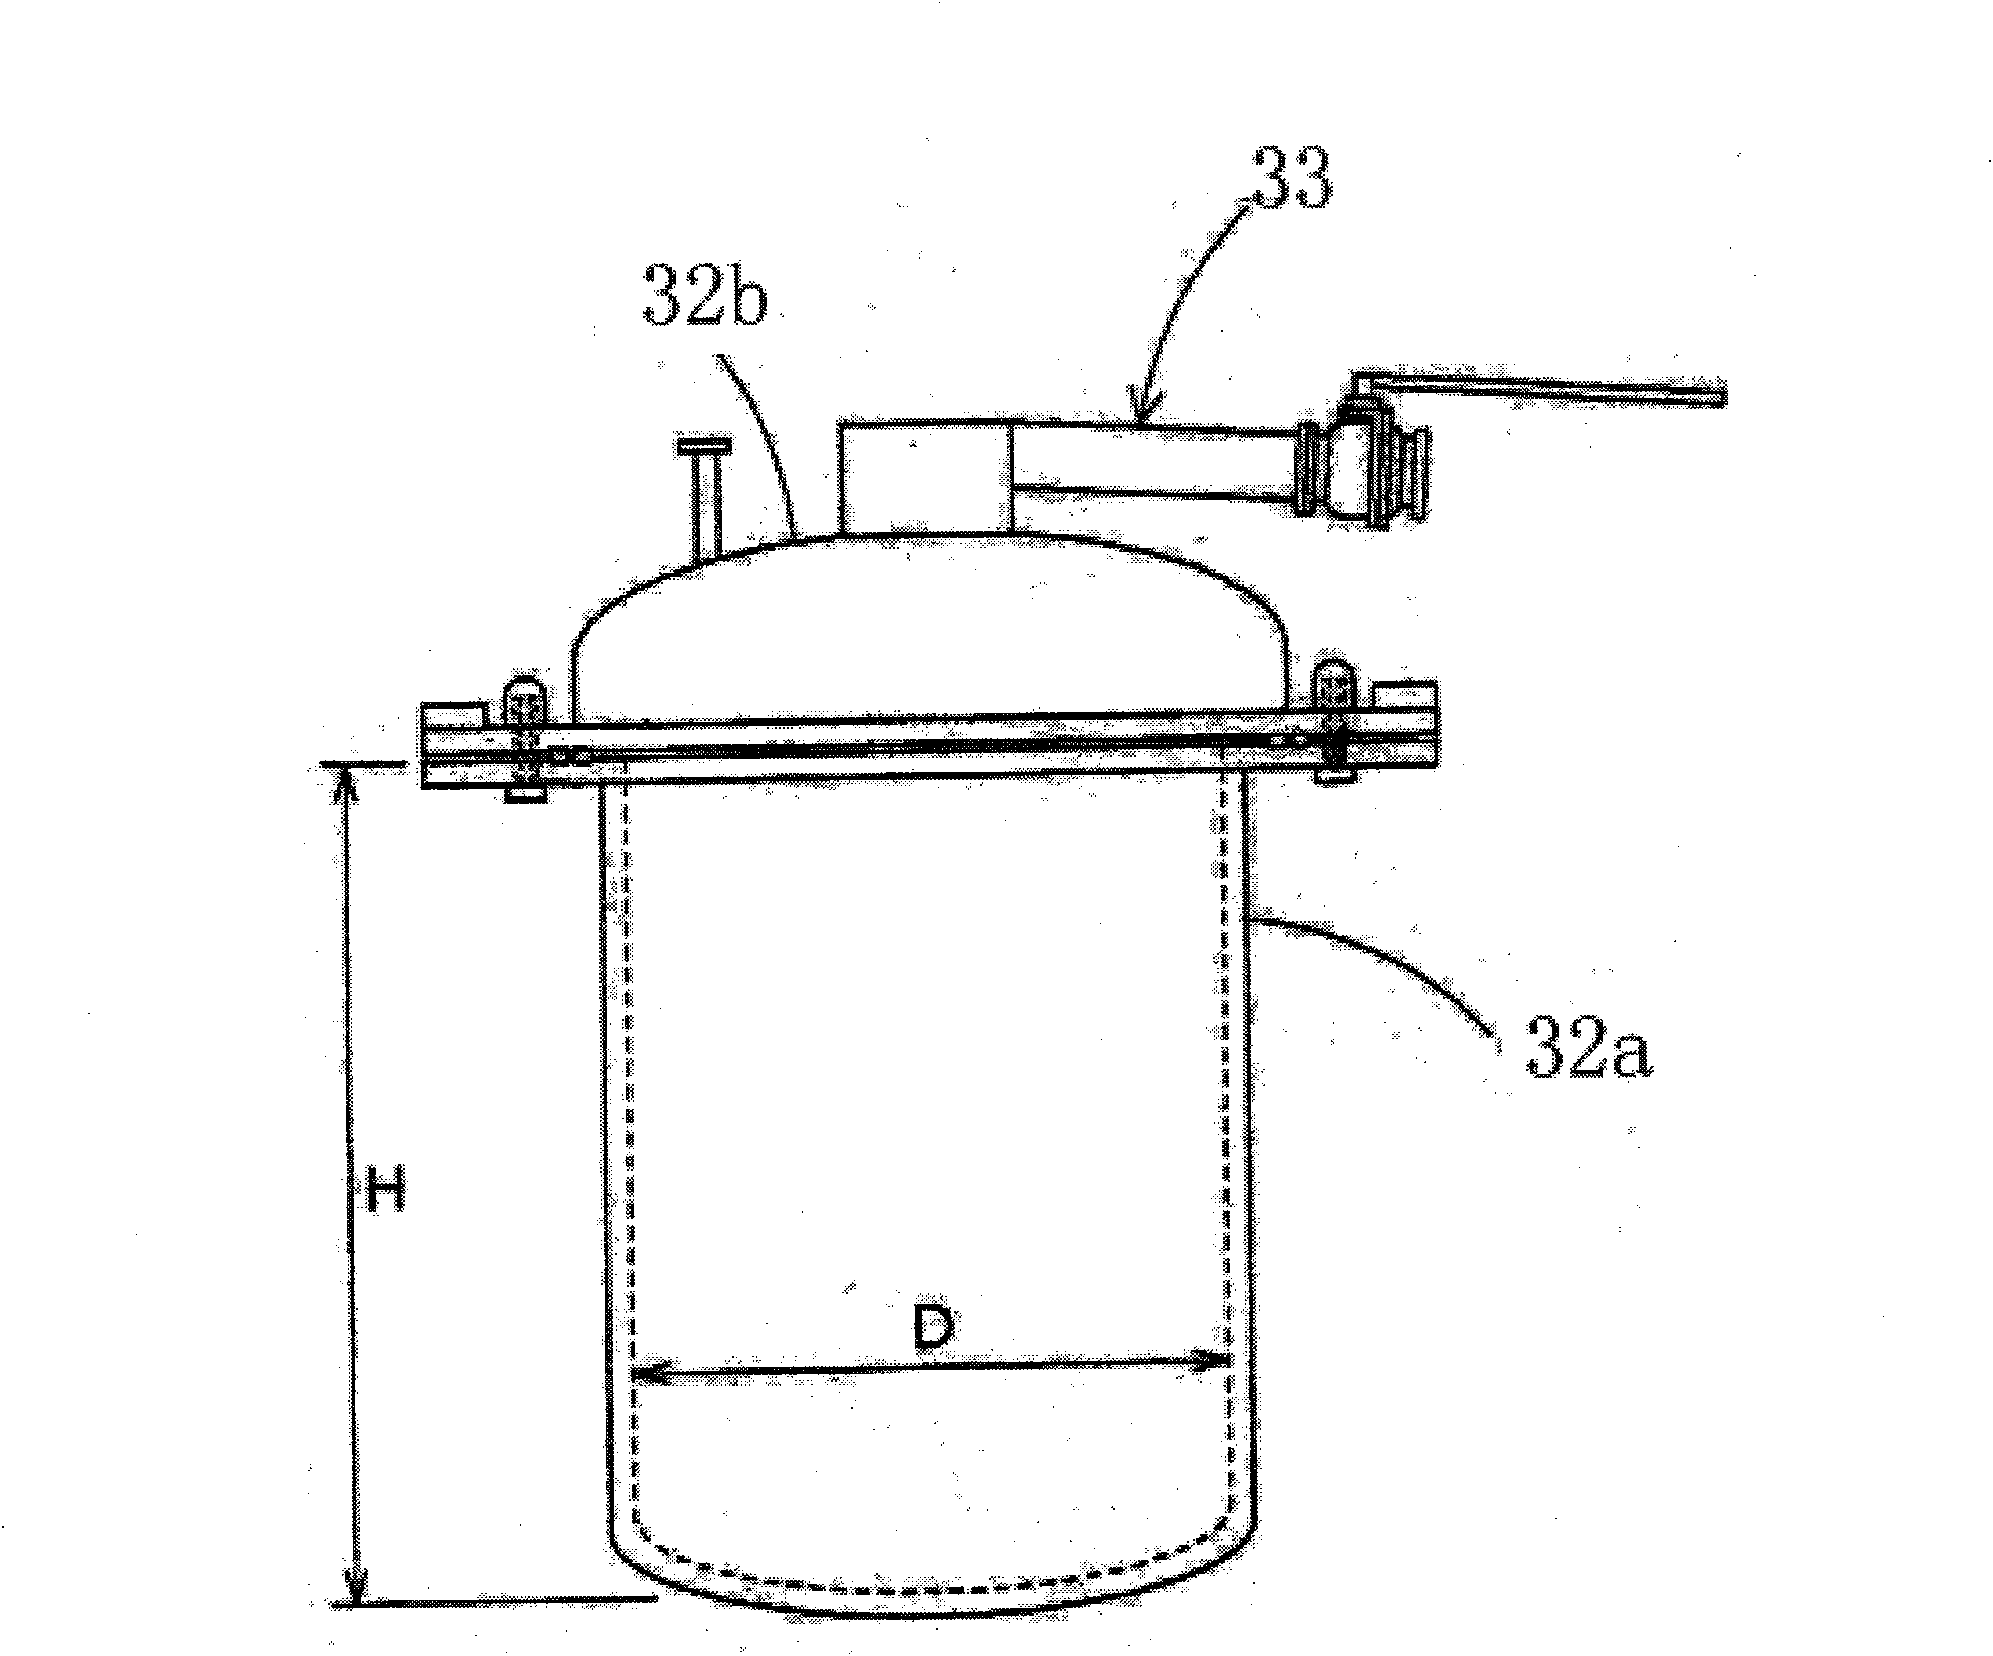 Innocent treatment and oily recovery device of polymer waste